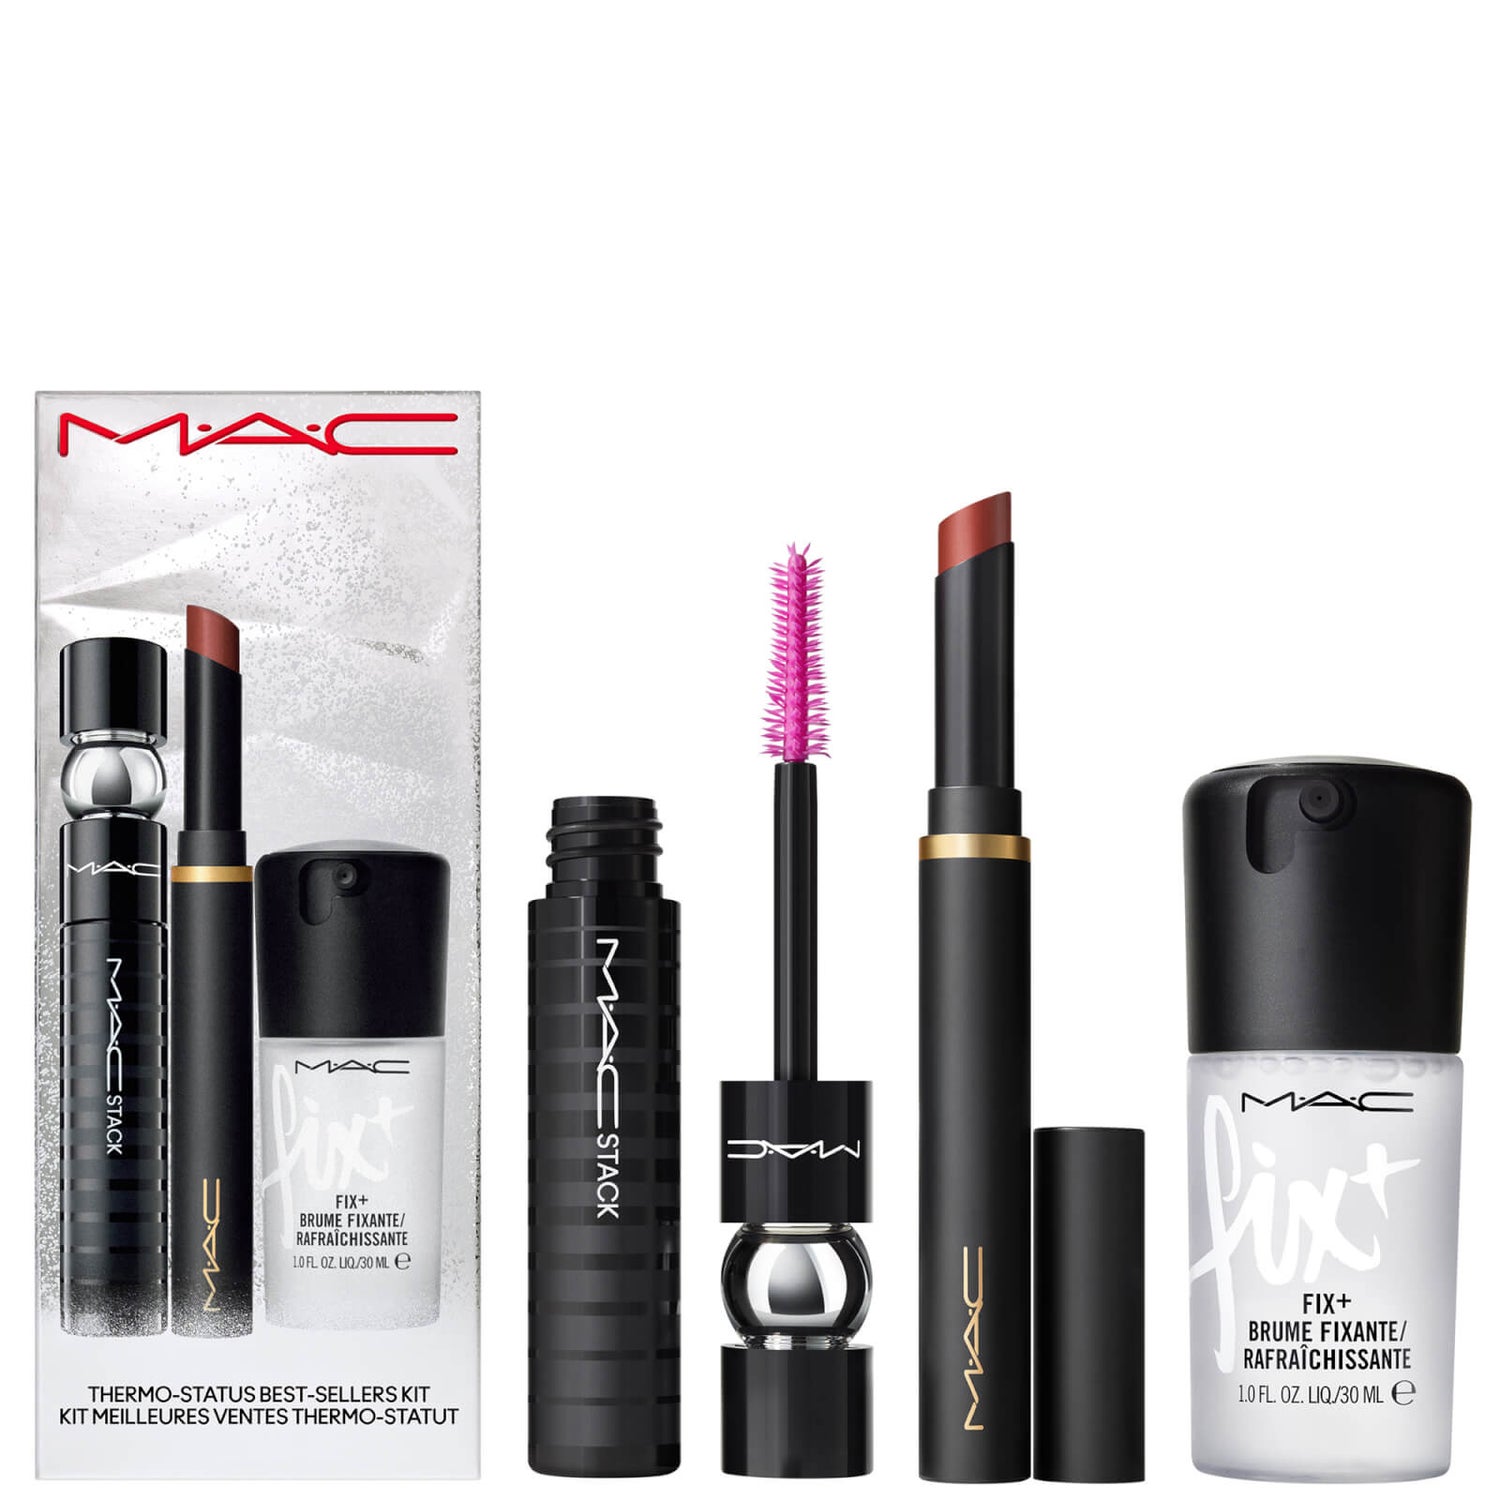 MAC Thermo-Status Best-Sellers Kit (Worth £68.00)